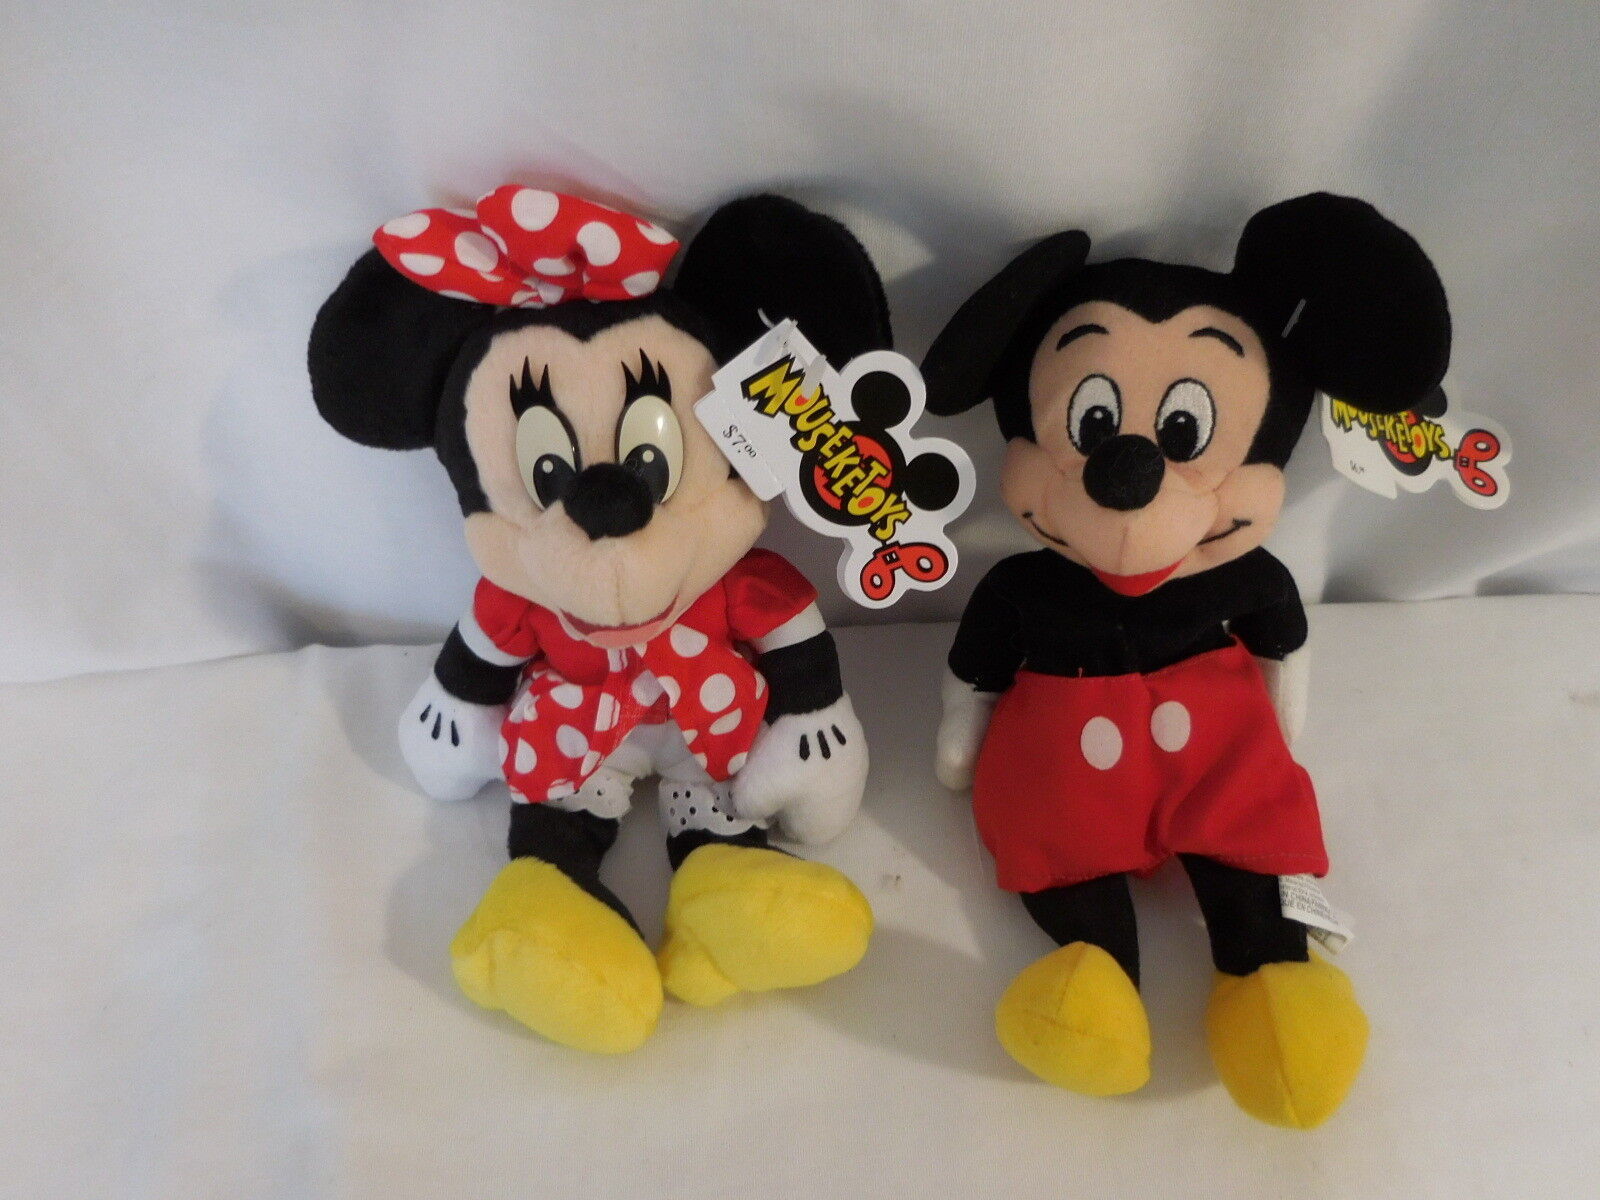 DISNEY Minnie & Mickey Mouse Classic Pair Classic Outfits Plush Beanies Mouseket - $20.81